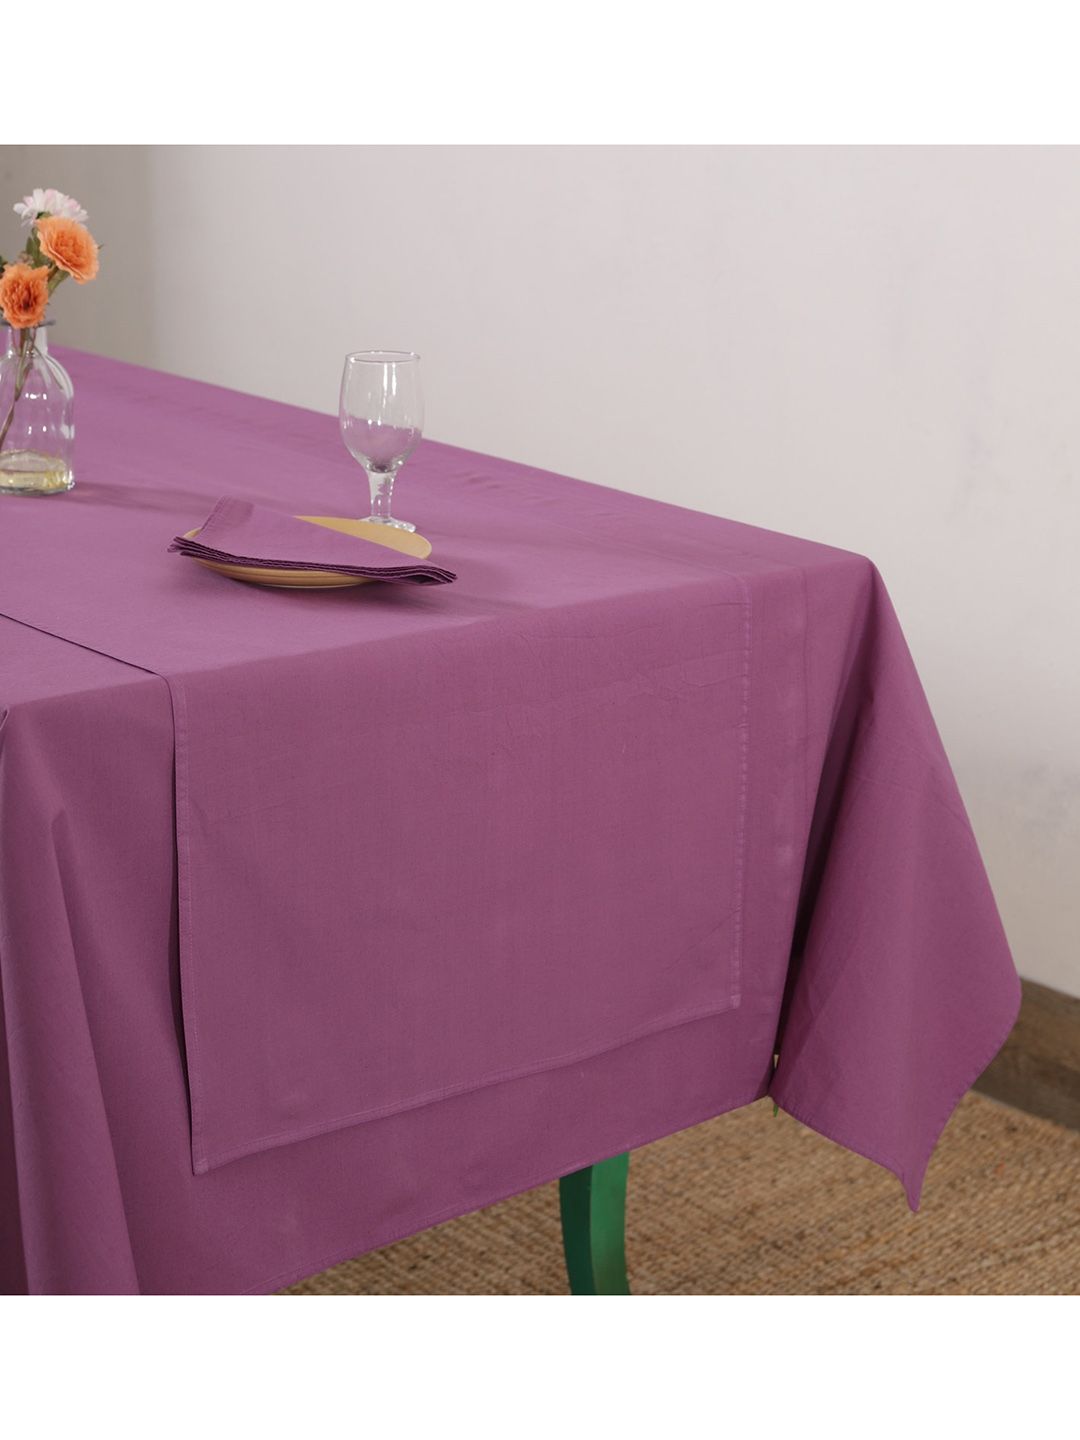 HANDICRAFT PALACE cotton Purple Solid 6 Seater Pure Cotton Table Cover & 6 Piece Napkins Price in India